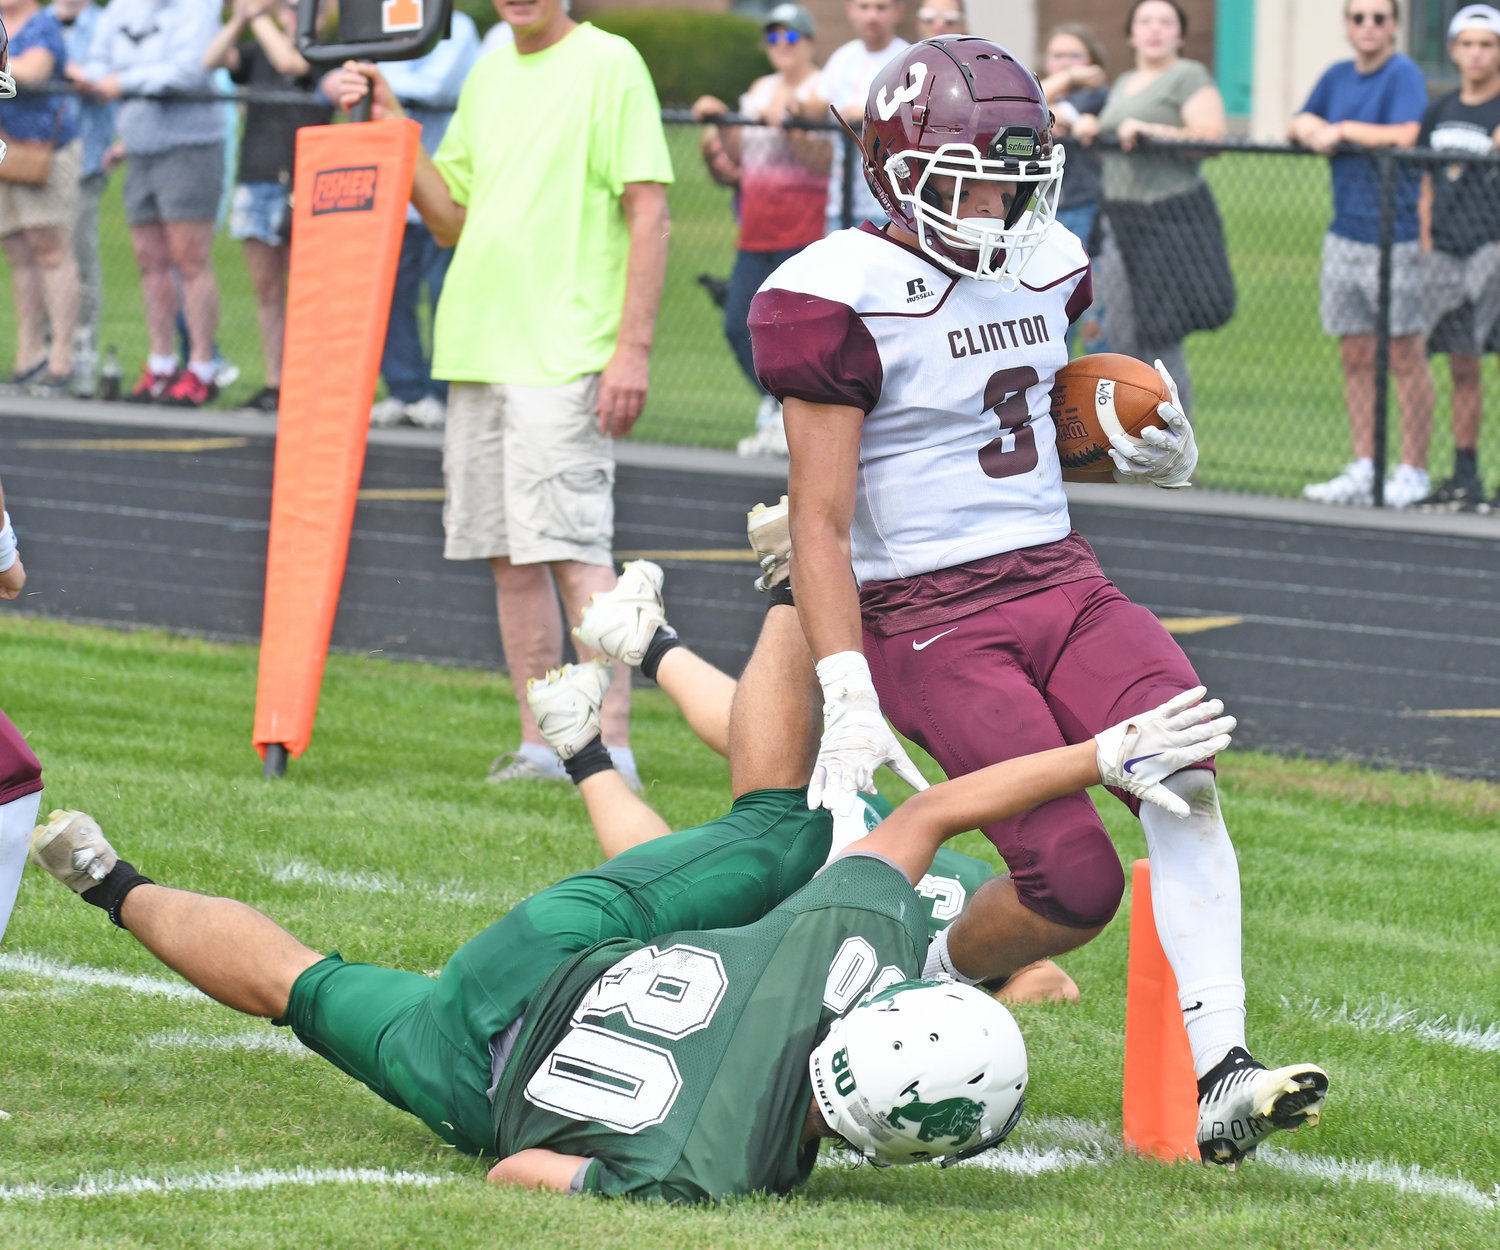 Clinton senior Cameron Maline crosses the goal line to score a touchdown on a 58-yard punt return in the second quarter during Saturday afternoon’s non-league game against host Westmoreland/Oriskany. Westmoreland’s Gino Marangi tries to make a play at the goal line. The Warriors won 28-6.